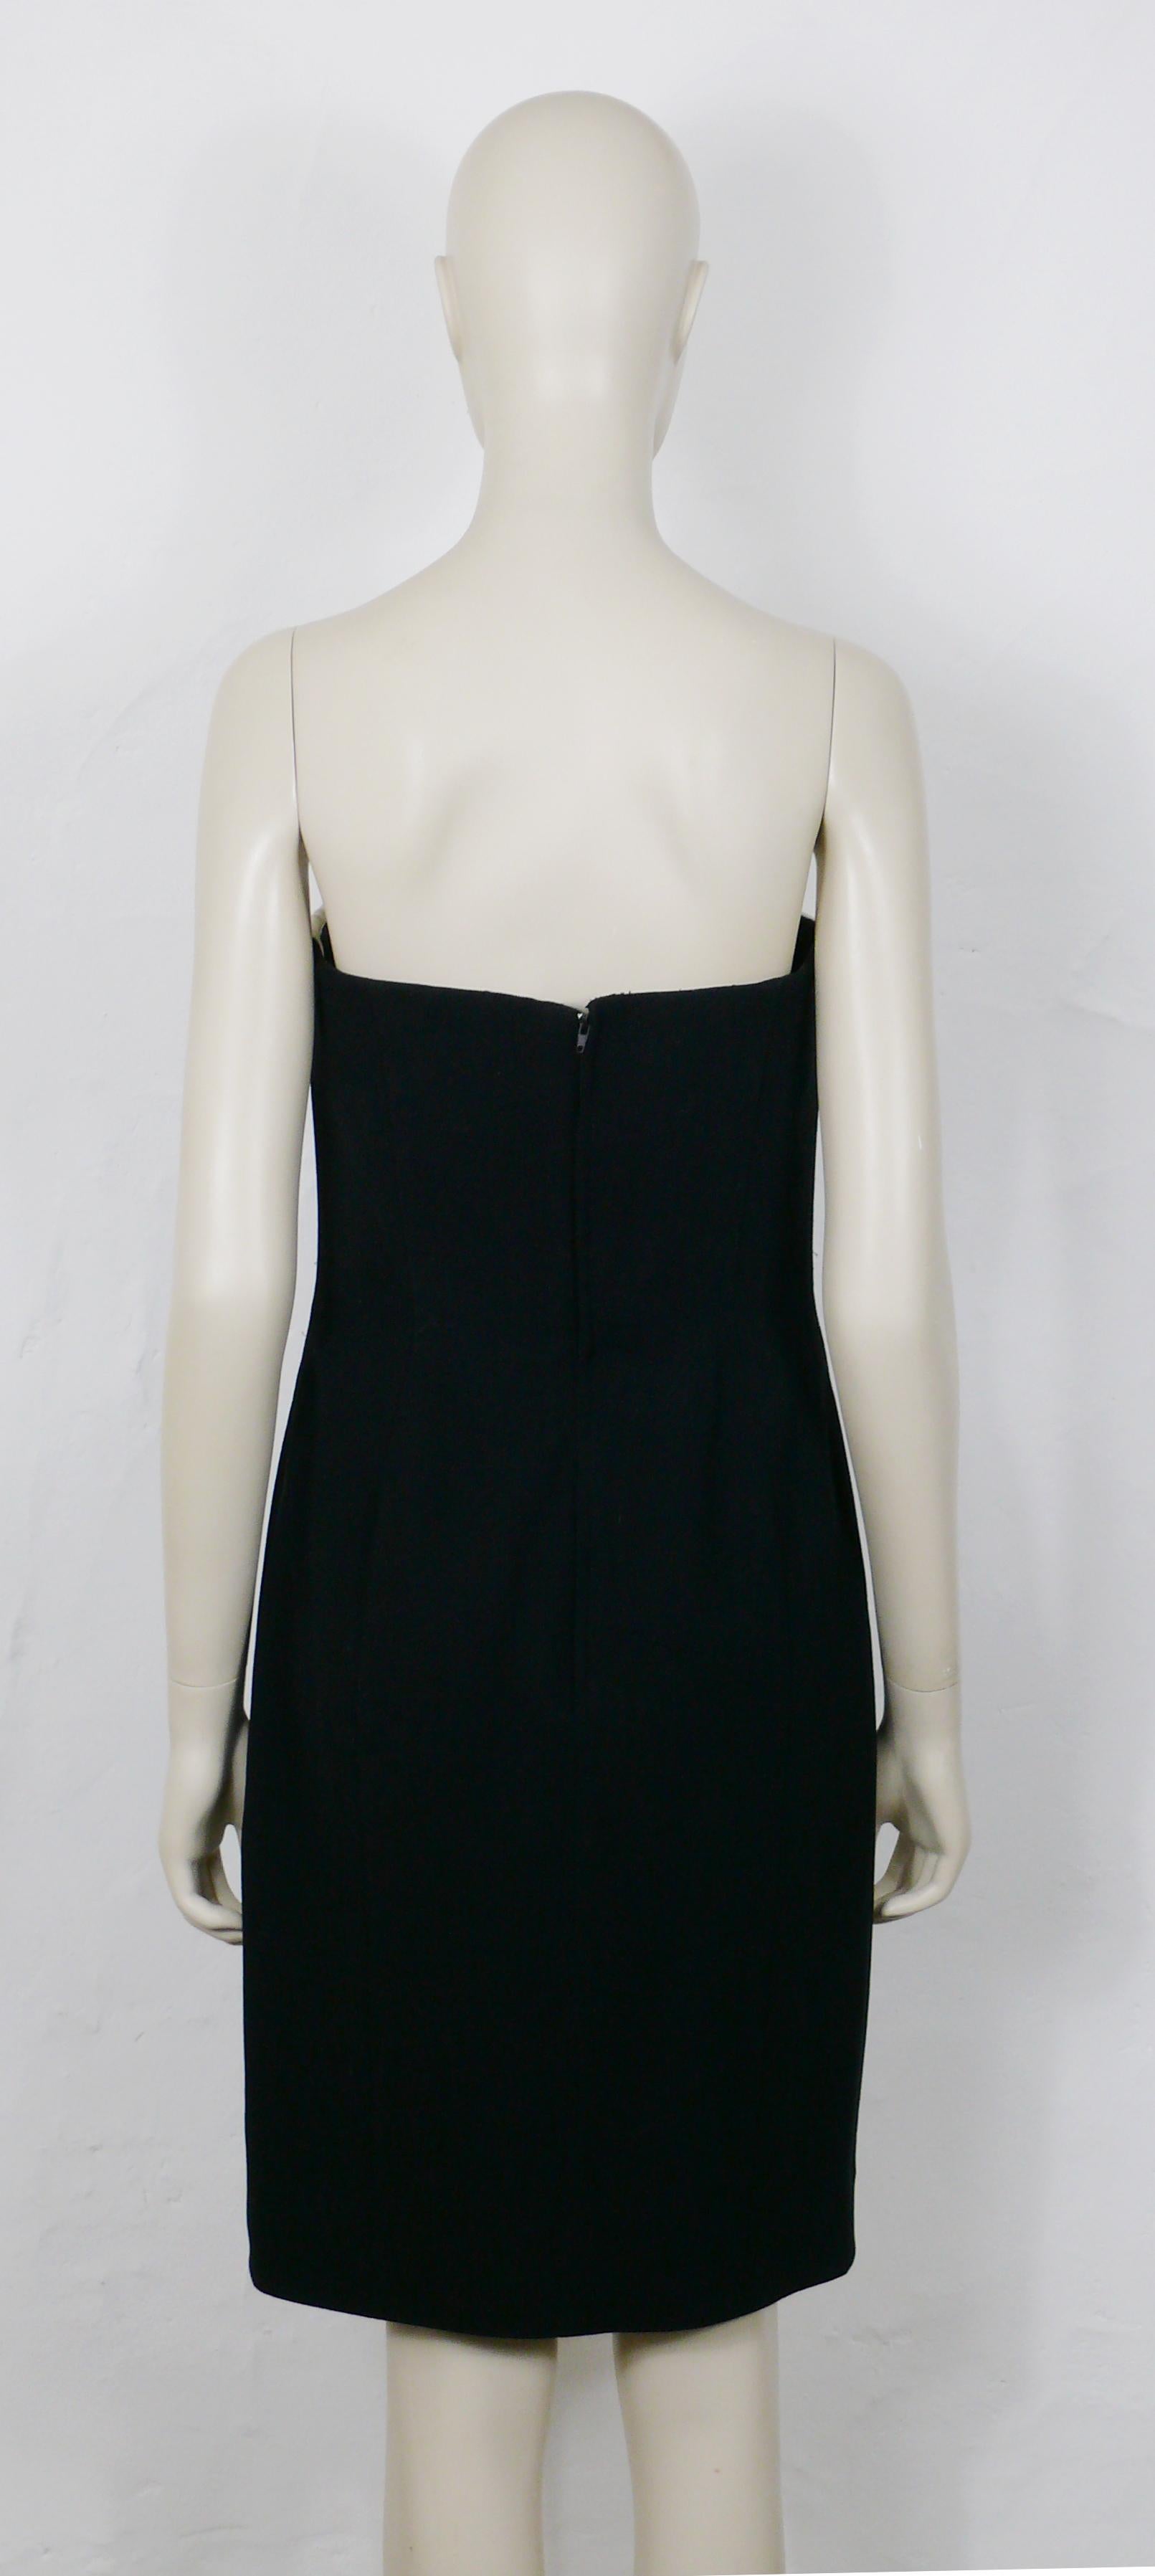 Thierry Mugler Vintage Black and White Asymetric Bustier Dress In Good Condition For Sale In Nice, FR